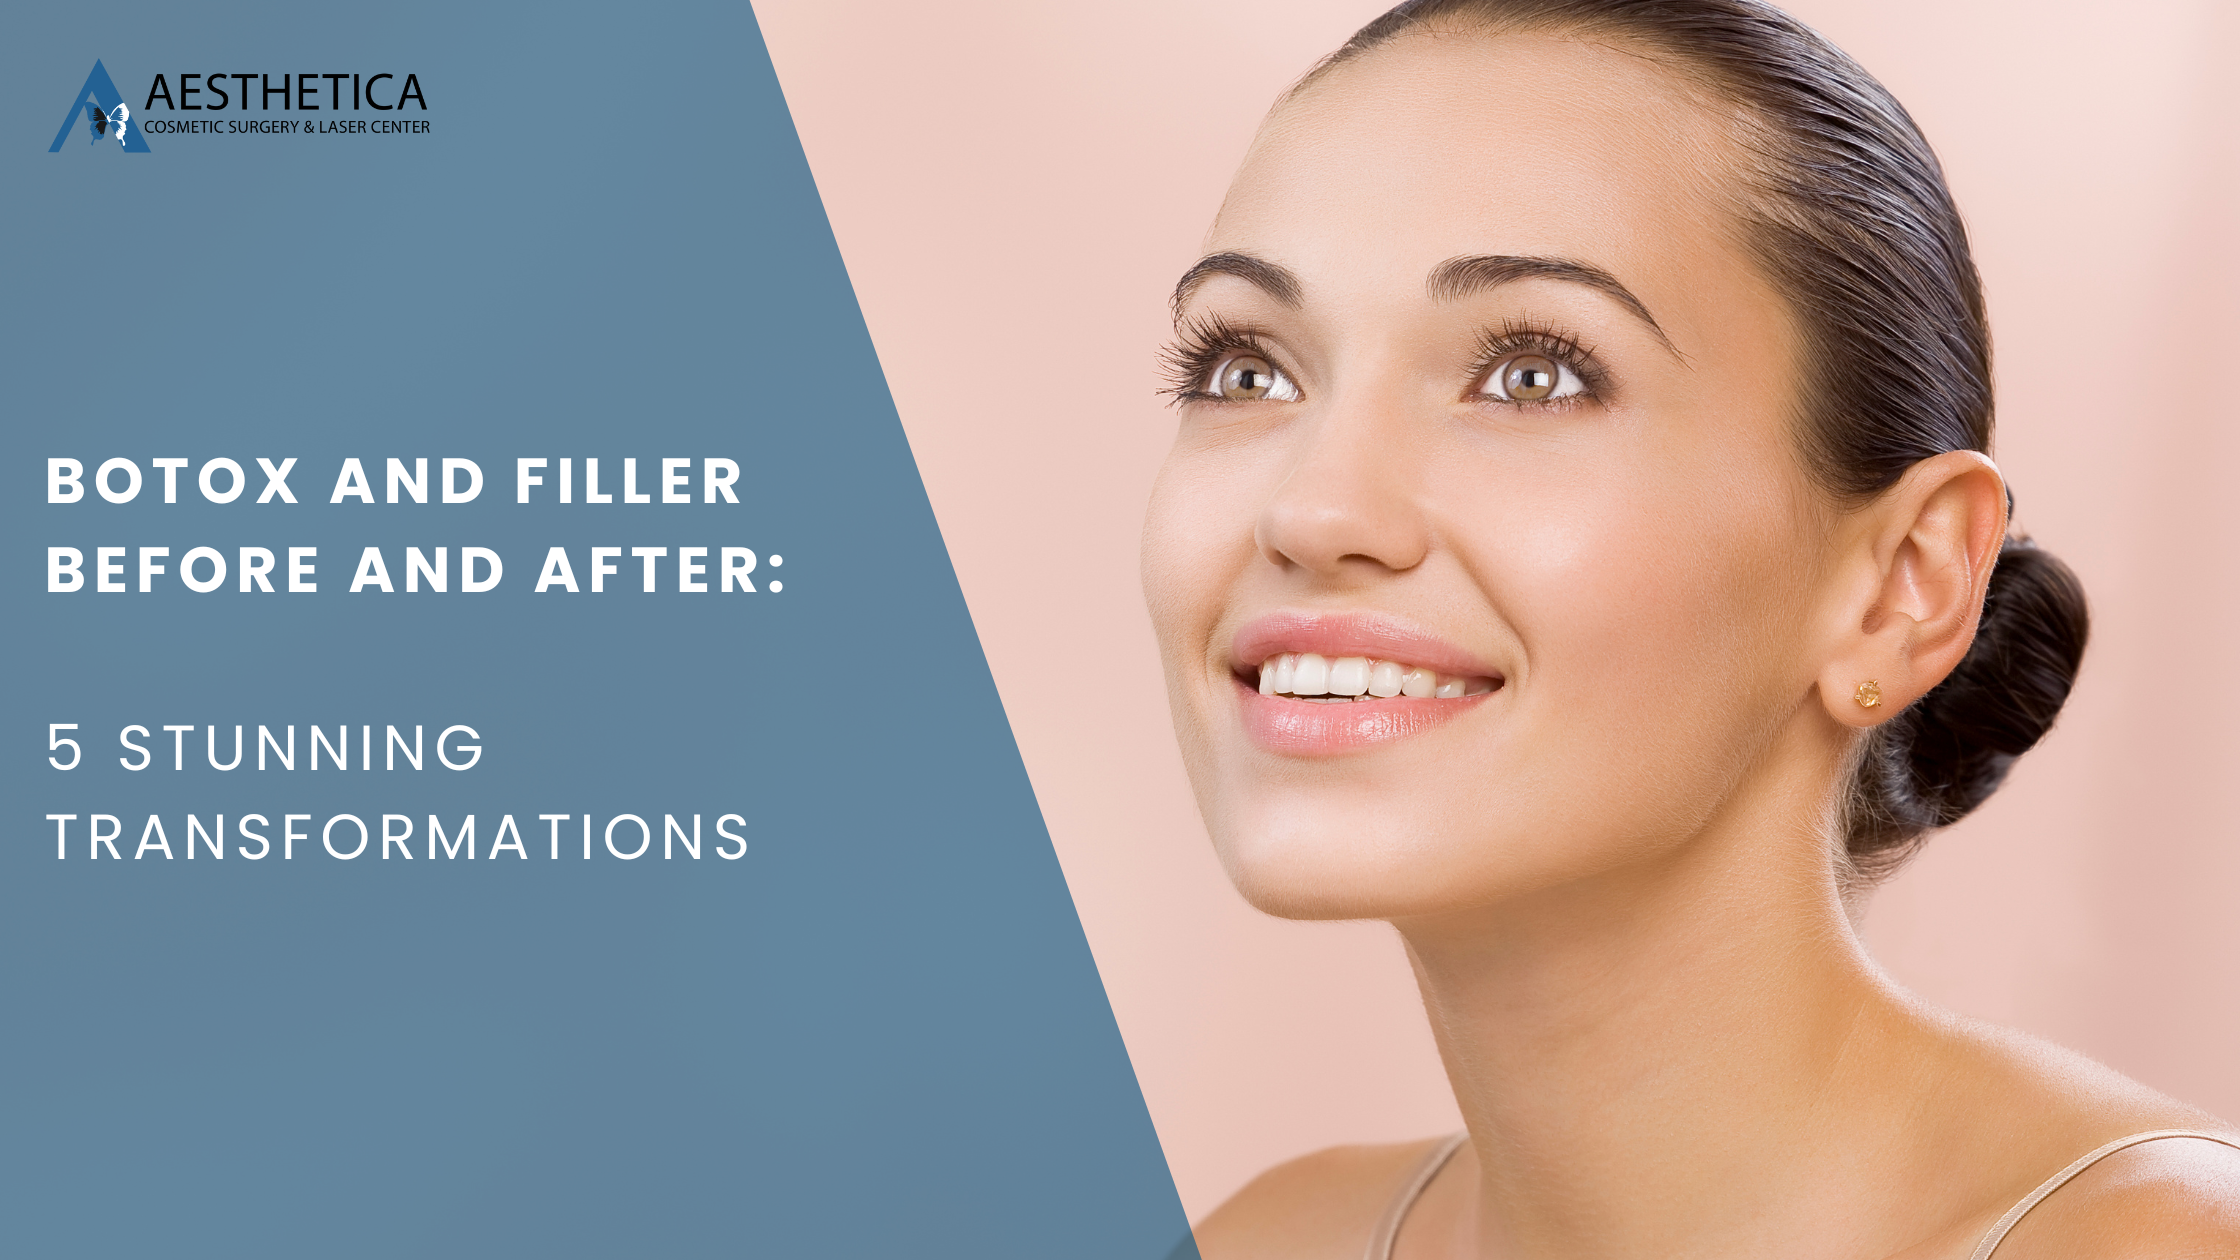 BOTOX and Filler Before and After: 5 Stunning Transformations